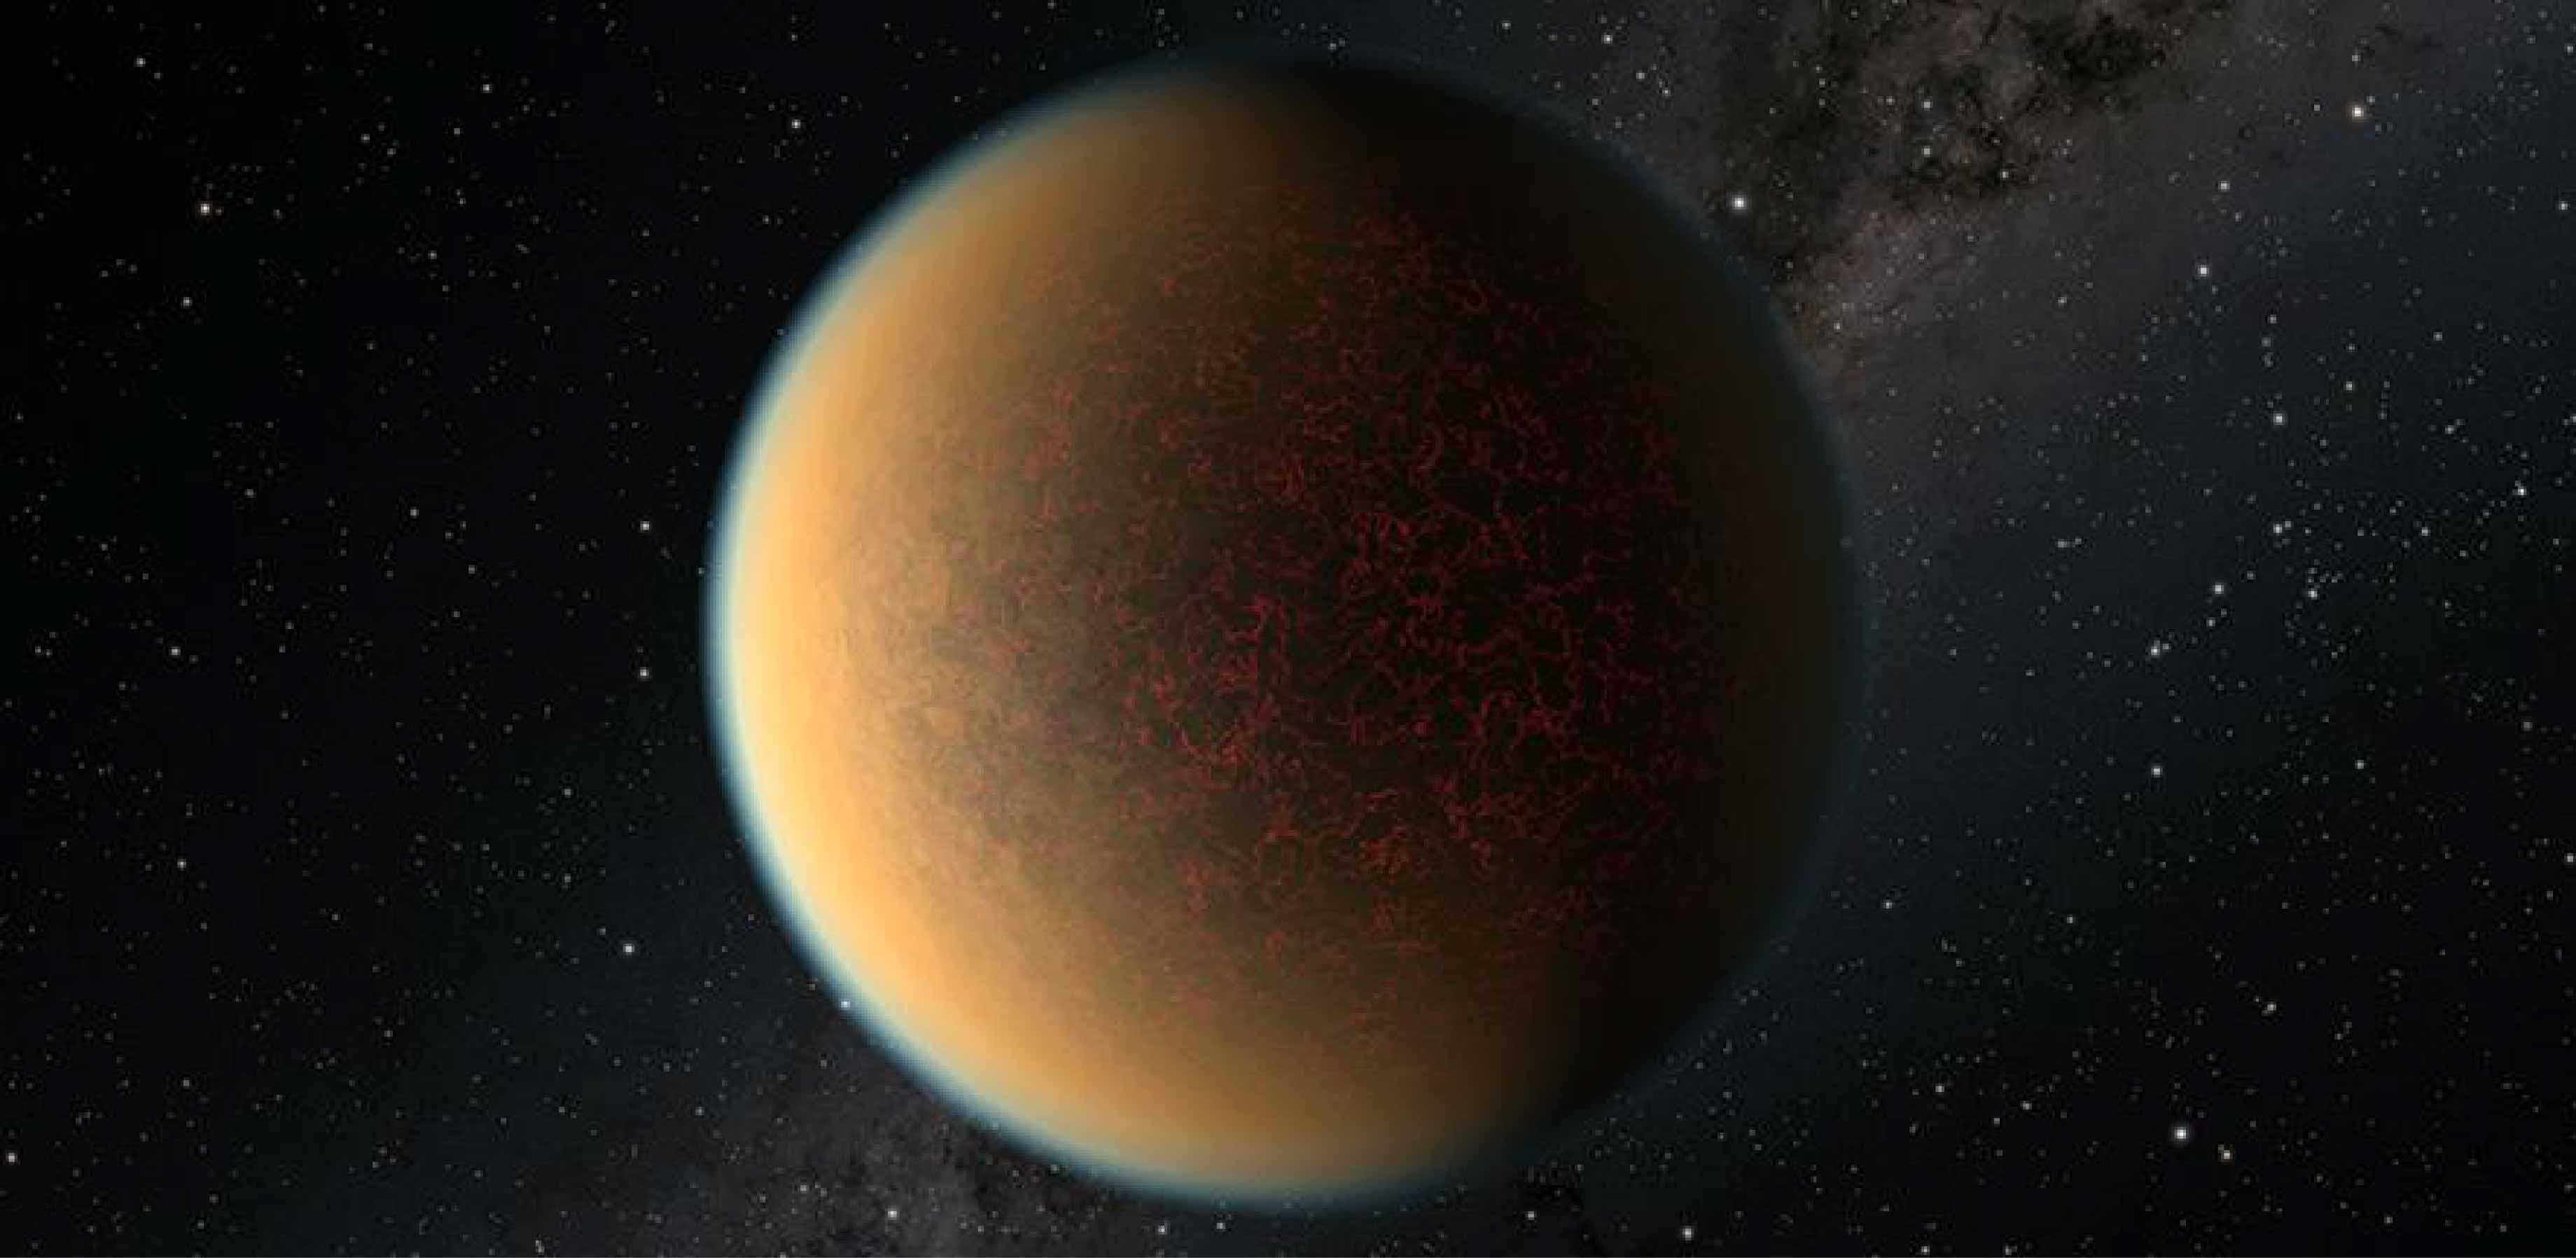 Artist’s impression of the exoplanet GJ 1132 b Credit: NASA, ESA, and R. Hurt (IPAC/Caltech)